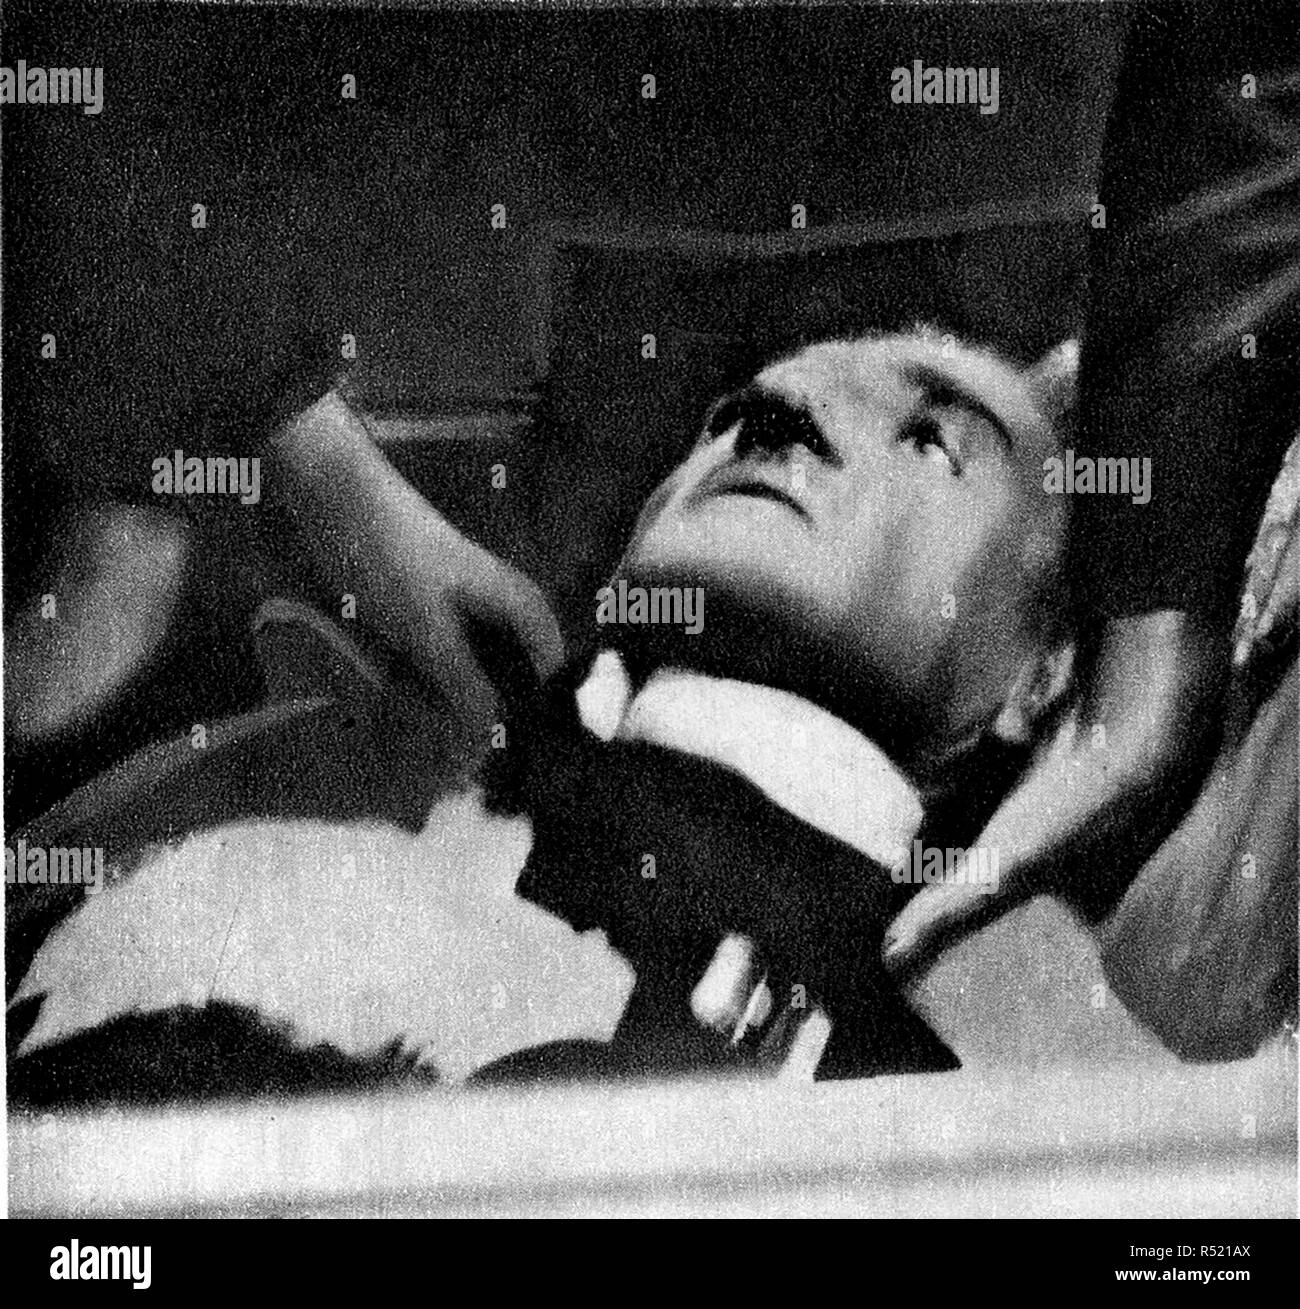 1934 - News illustration taken at the time of the moment of death during assassination of Alexander King of Yugoslavia (Alexander the Unifier) in Marseilles, France. Also assassinated was French Minister Barthou Stock Photo